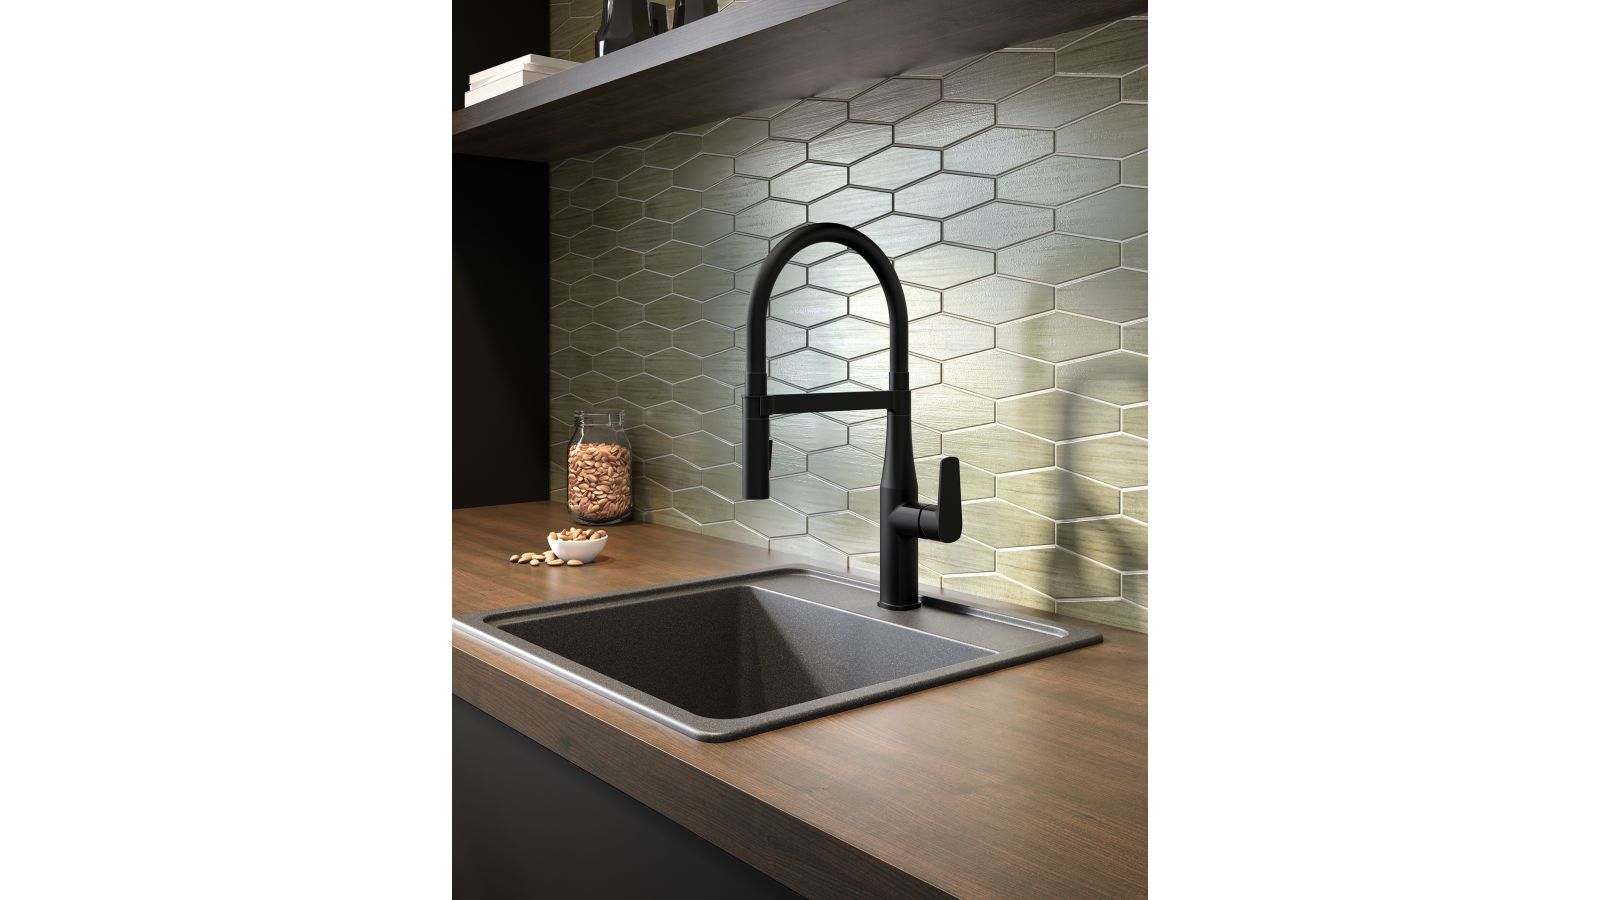 SNACK BAR KITCHEN FAUCET